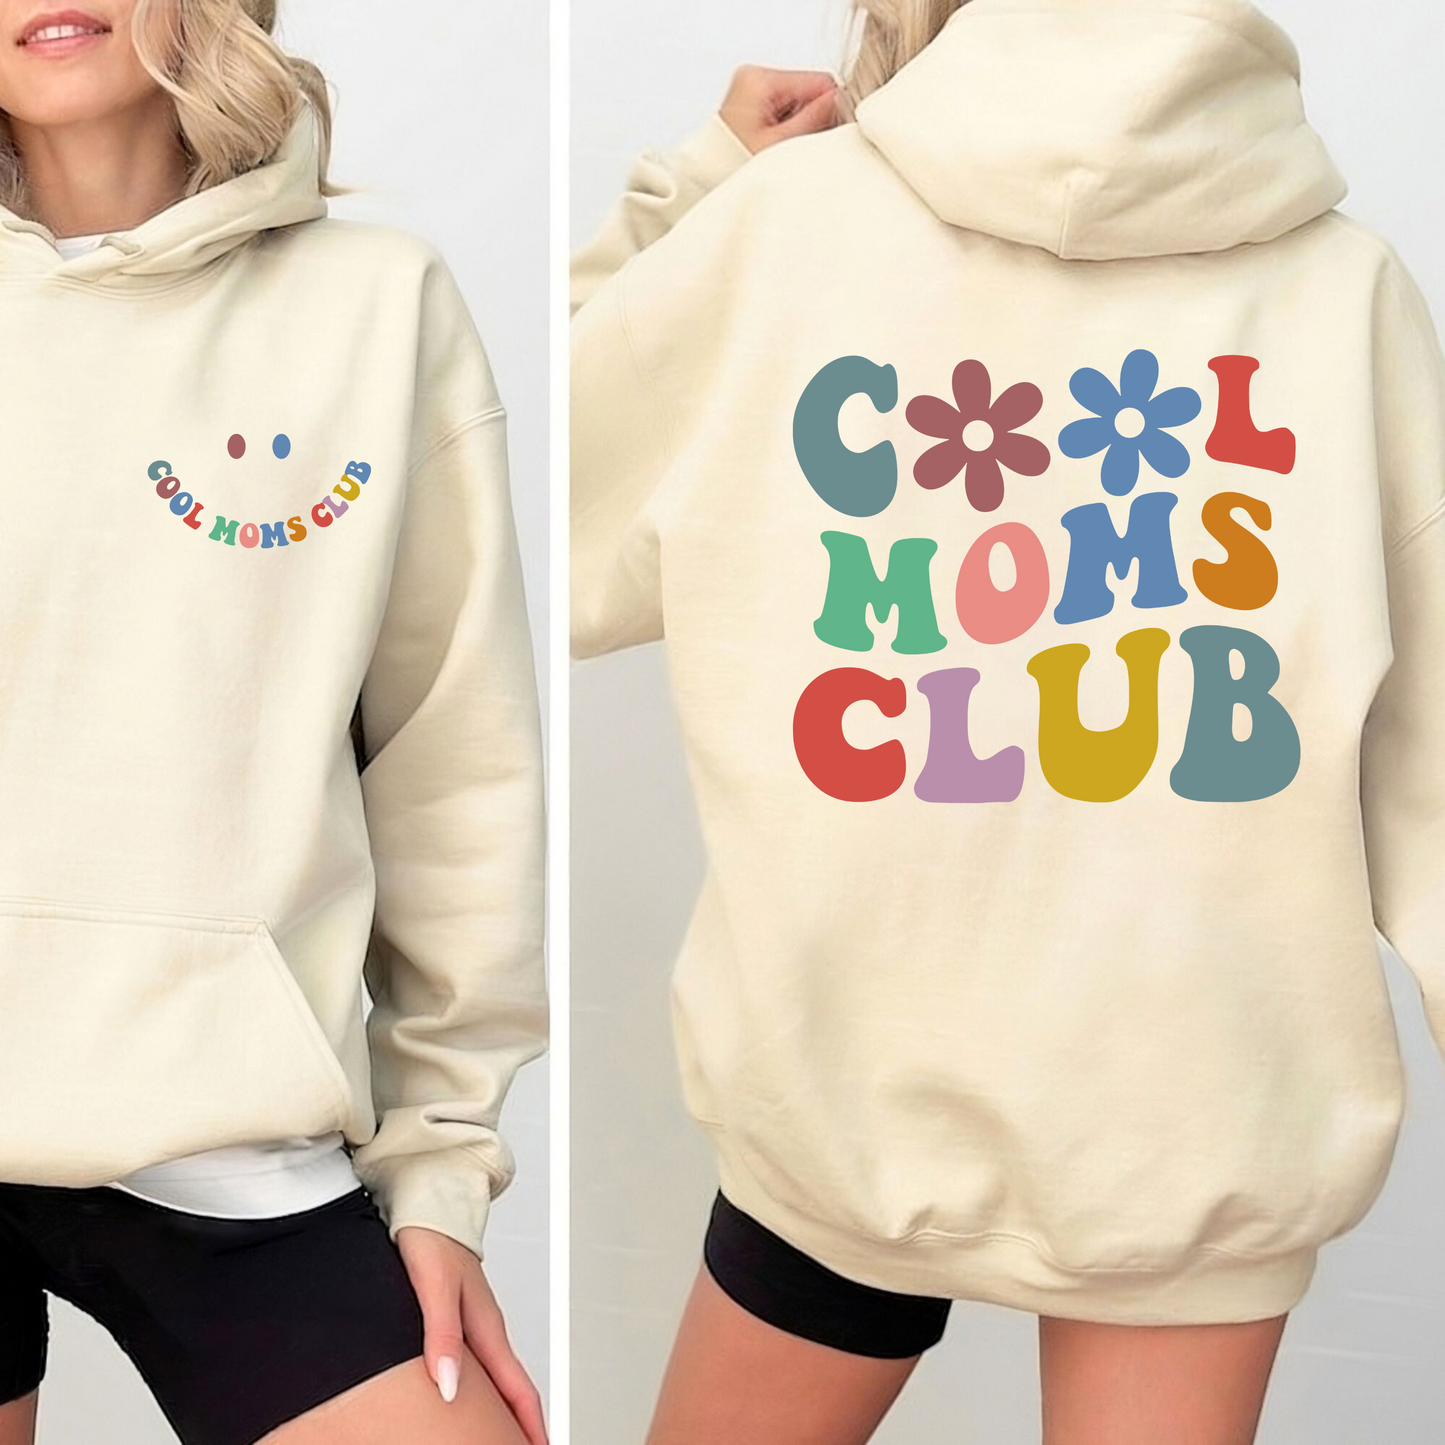 Cool Moms Club – Stylish Support for Modern Mothers